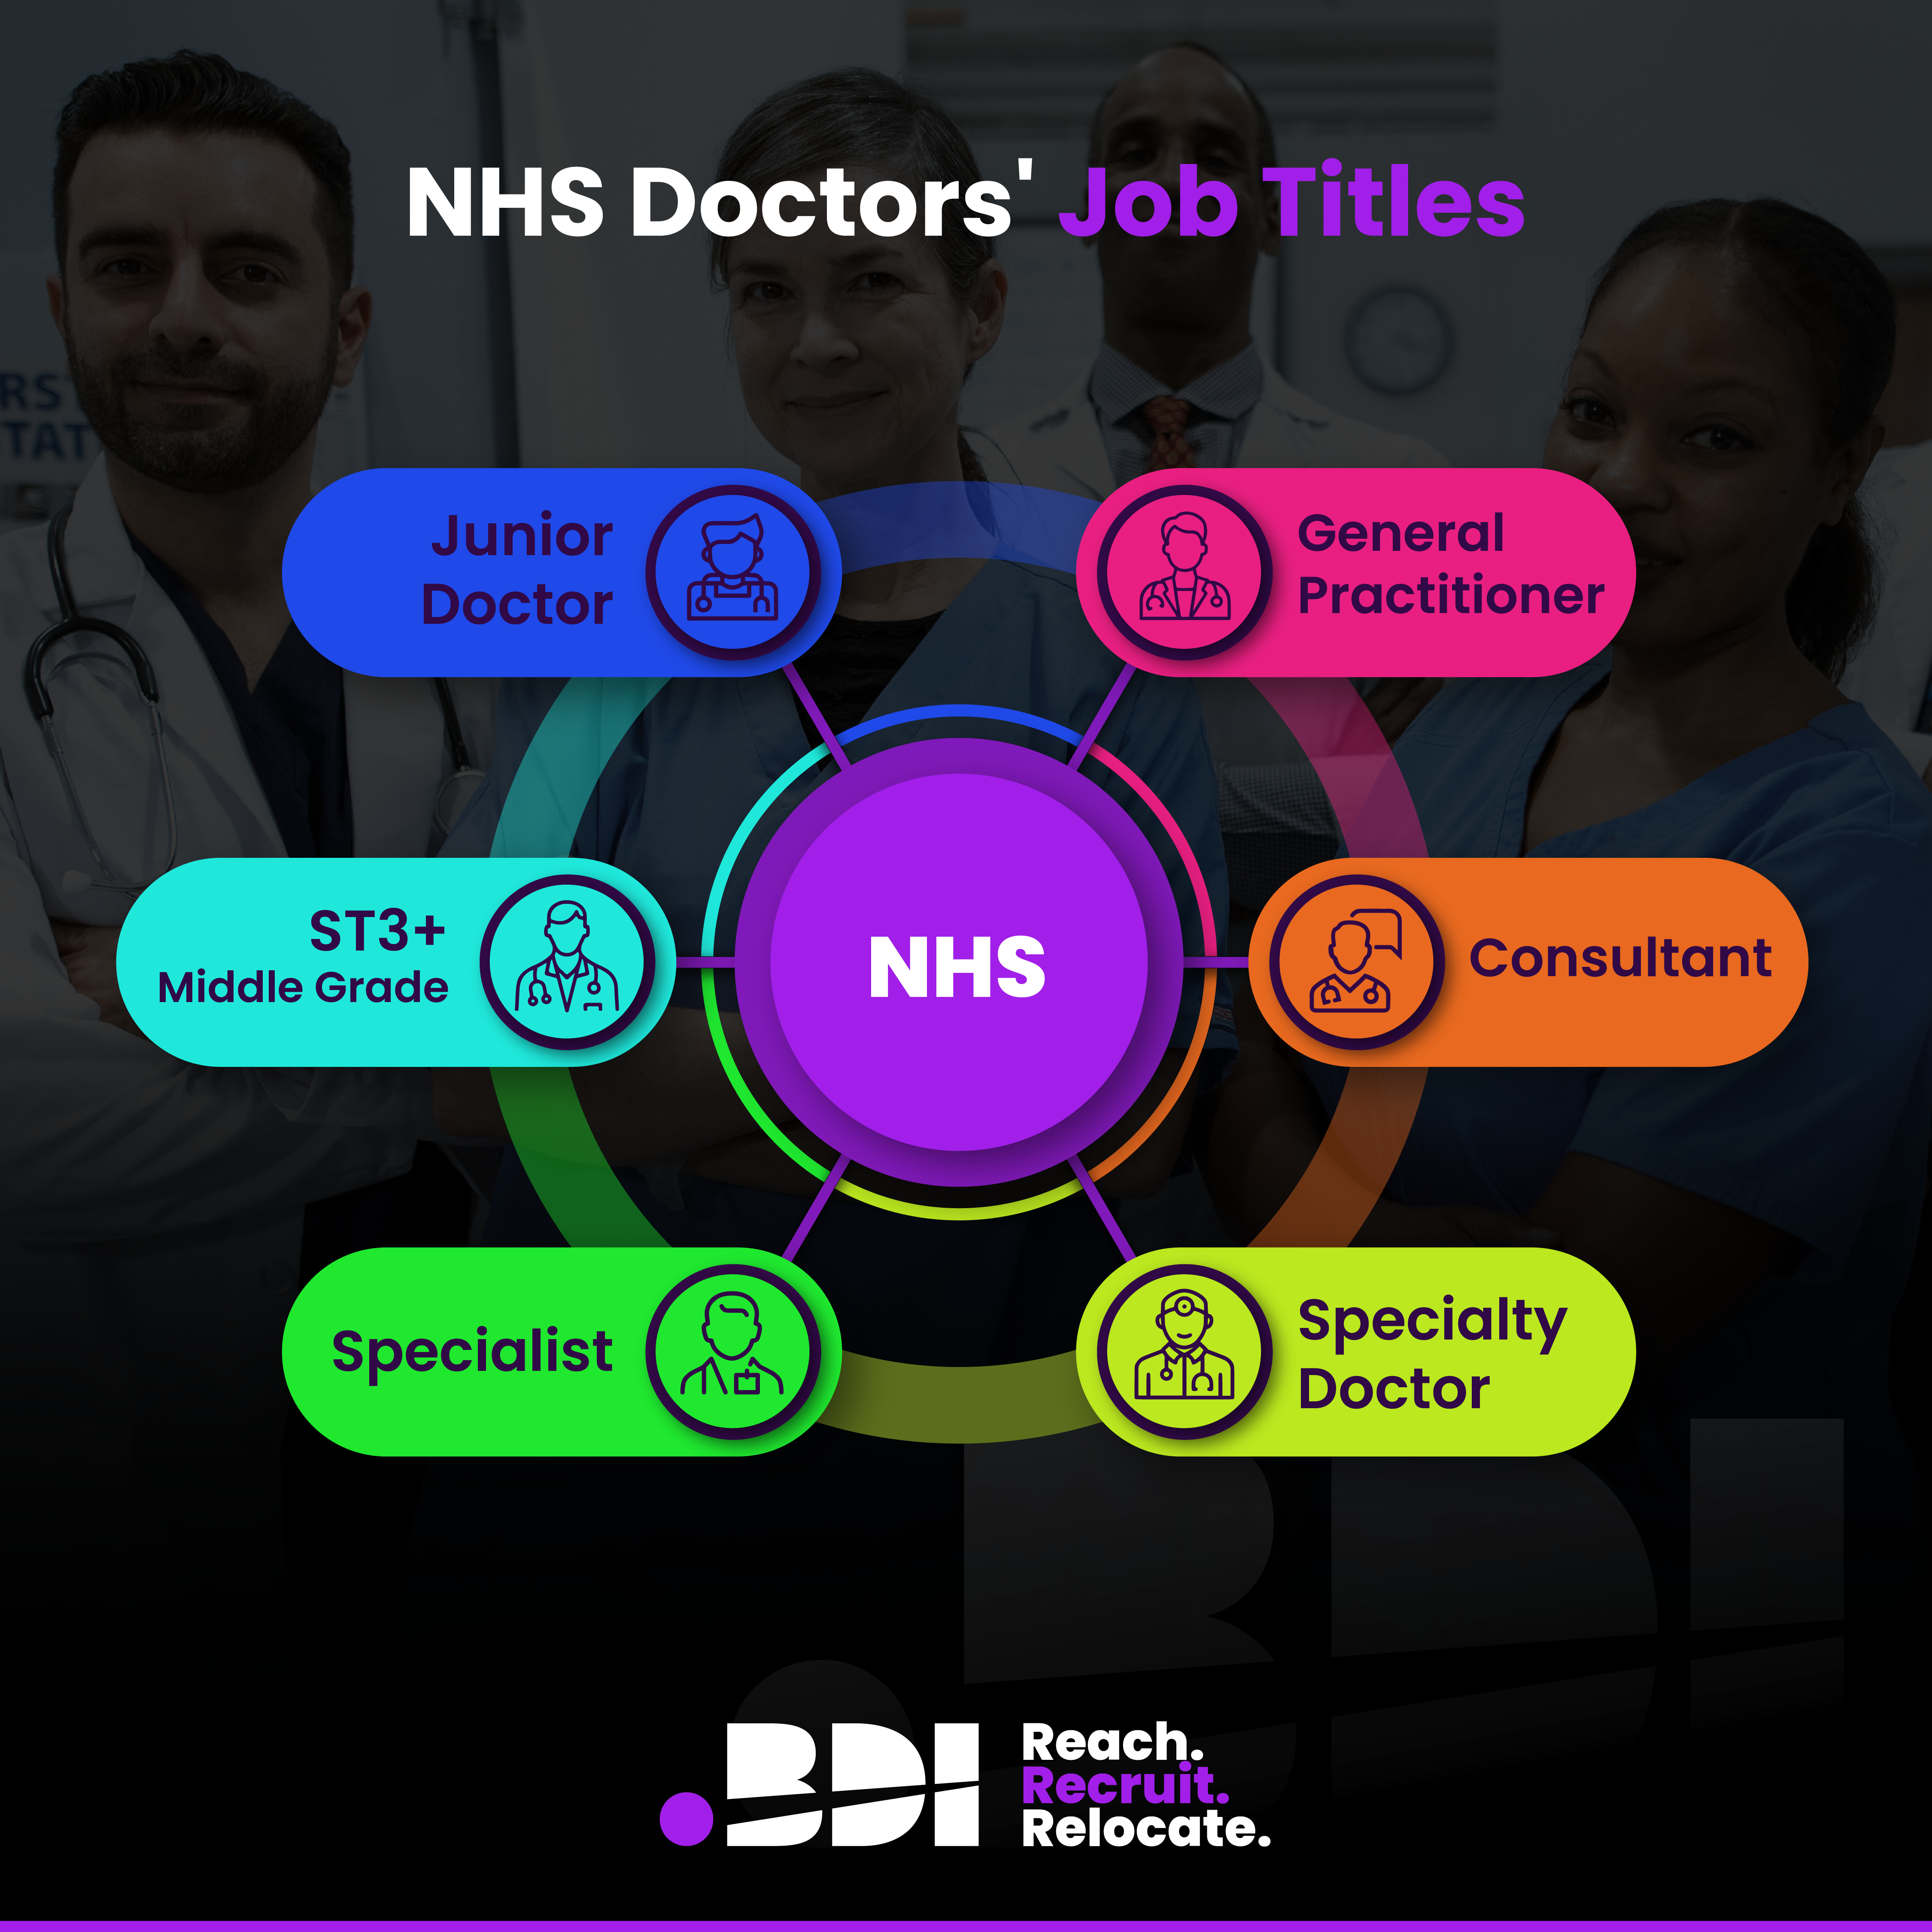 Infographic displaying the different types of job title for doctors in the NHS - junior doctors, general practitioner, ST3 Middle Grade, Consultant, Specialist and Specialty Doctor